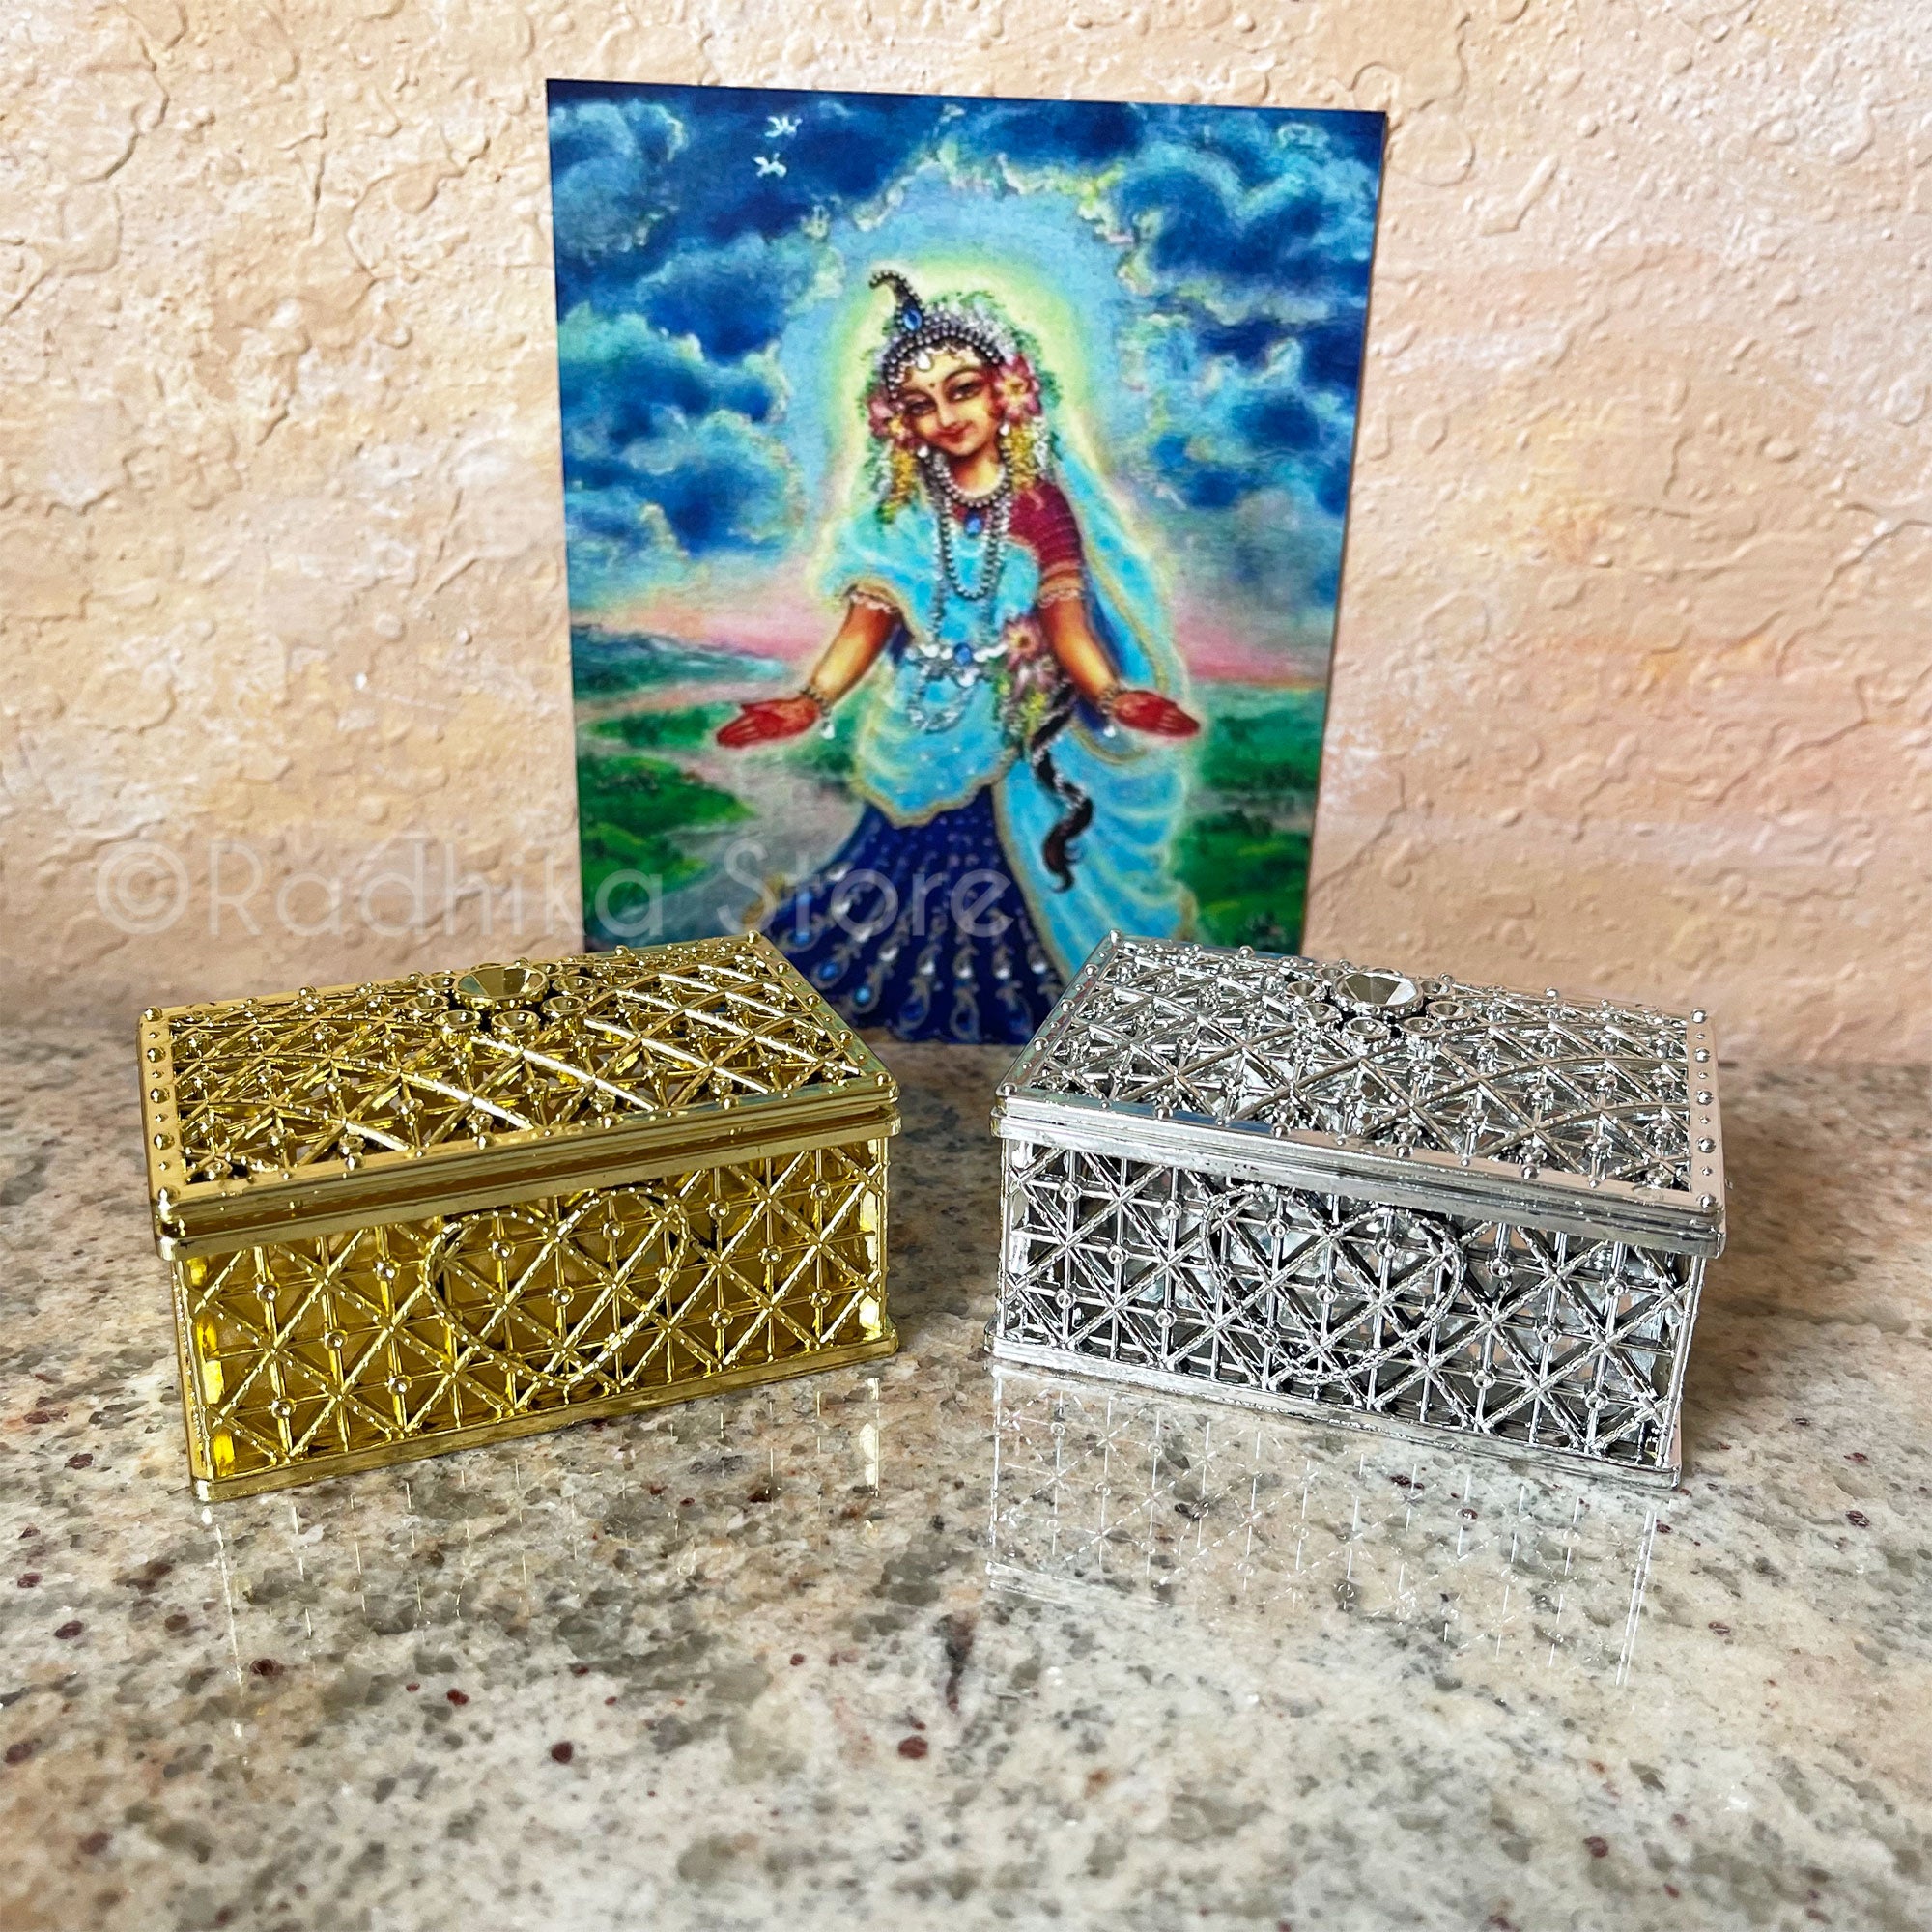 Decorative Gift Box or Jewelry Box - Light Box For Altar